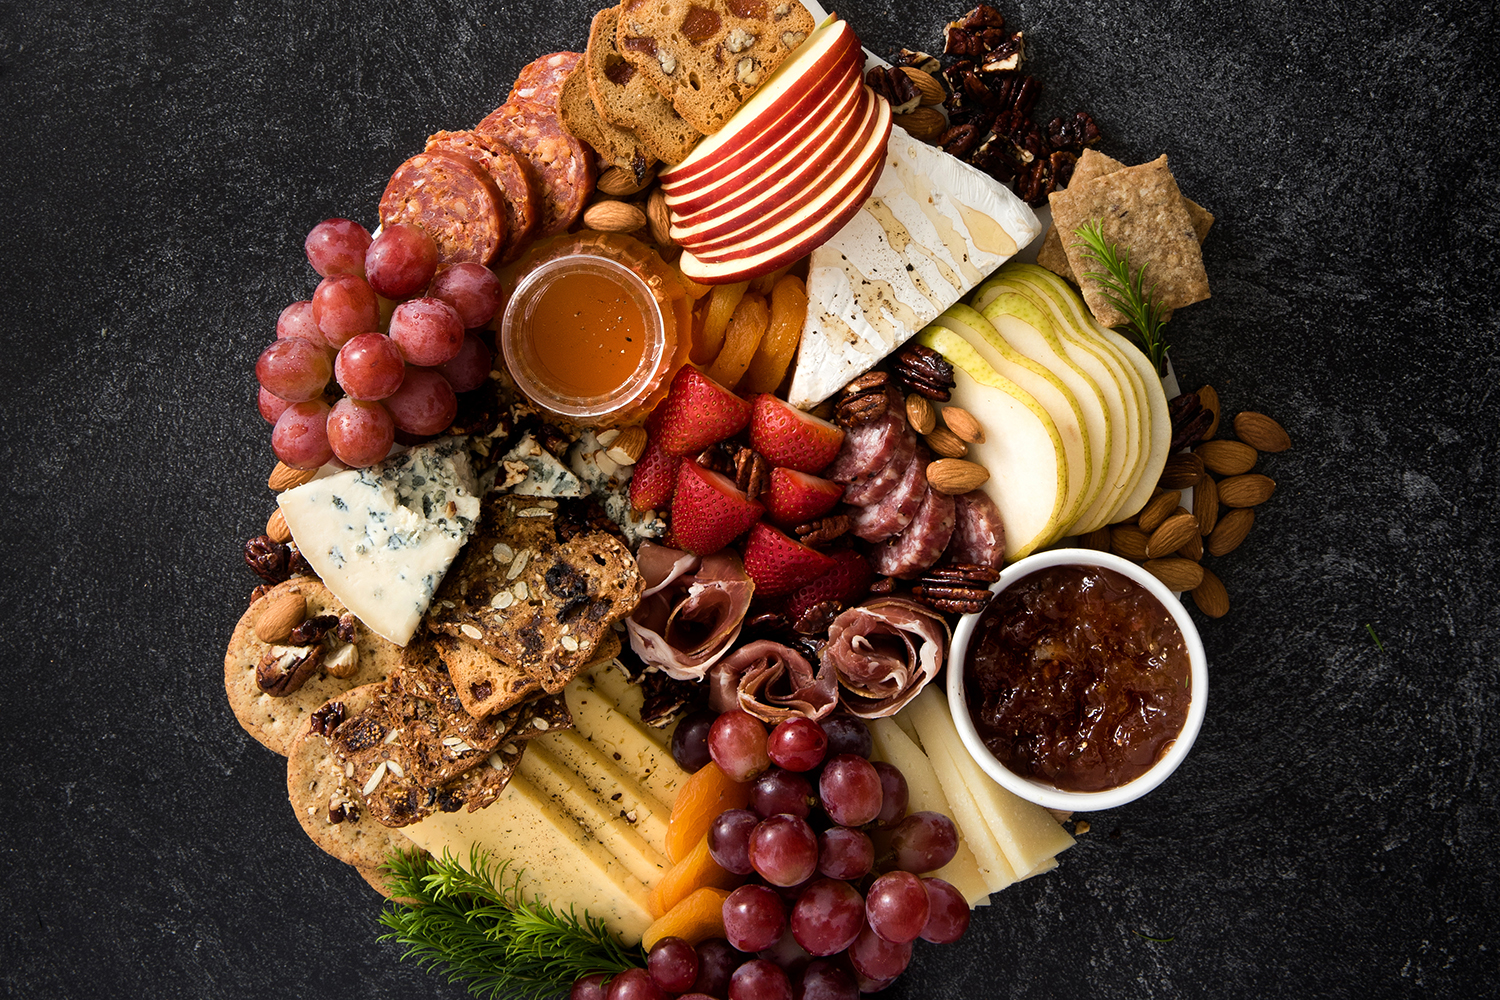 Made-in-Tennessee Charcuterie Board